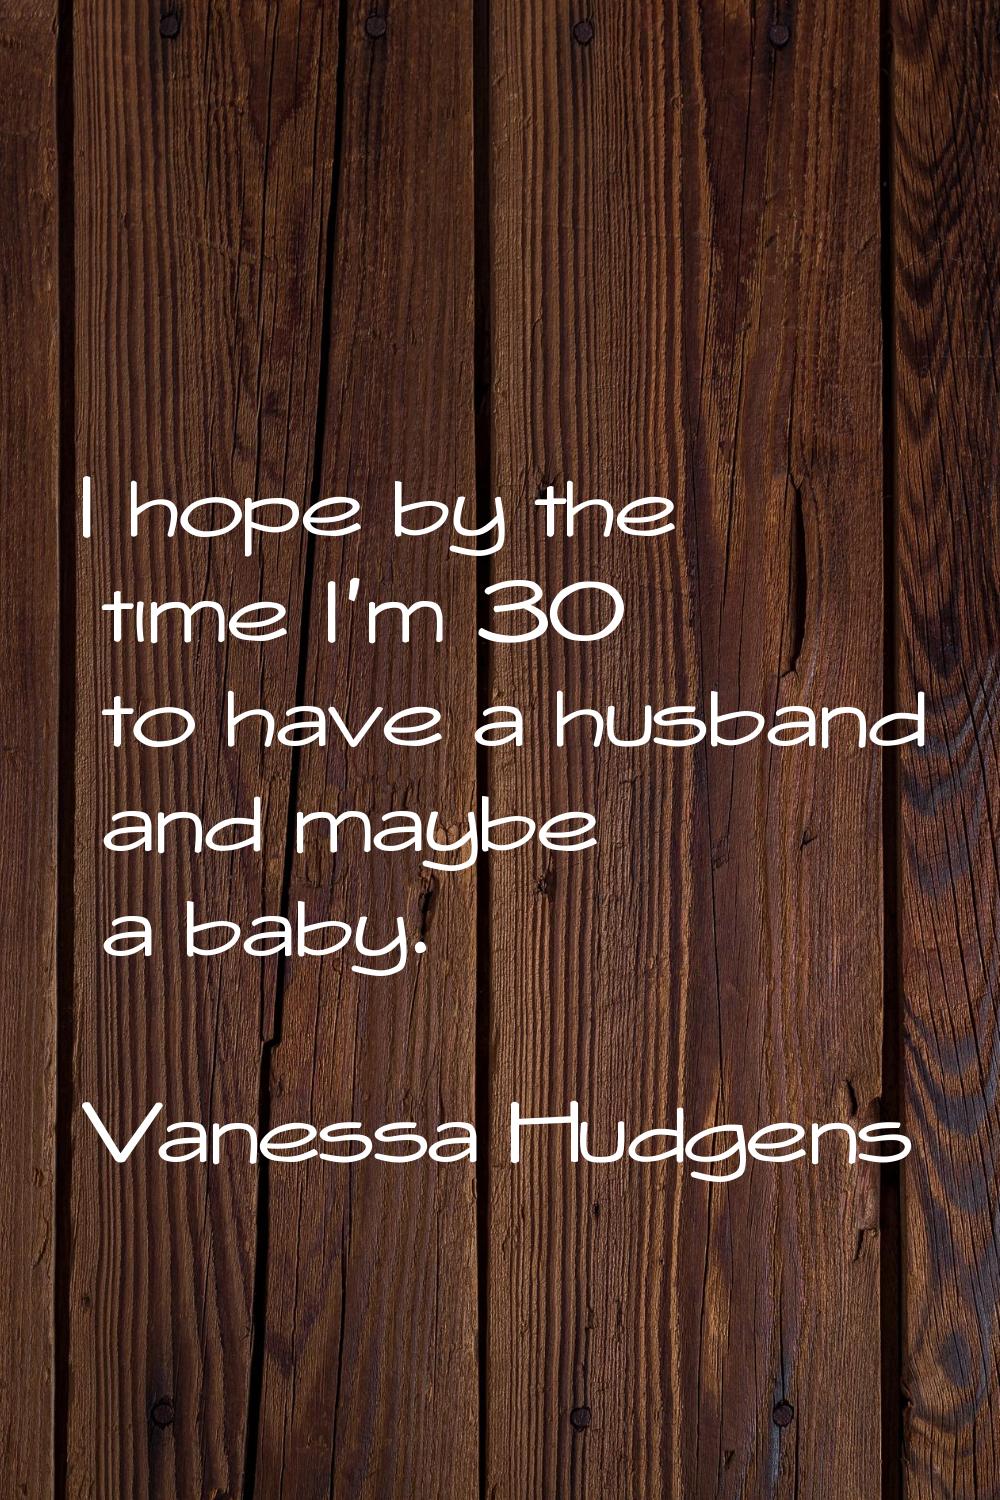 I hope by the time I'm 30 to have a husband and maybe a baby.